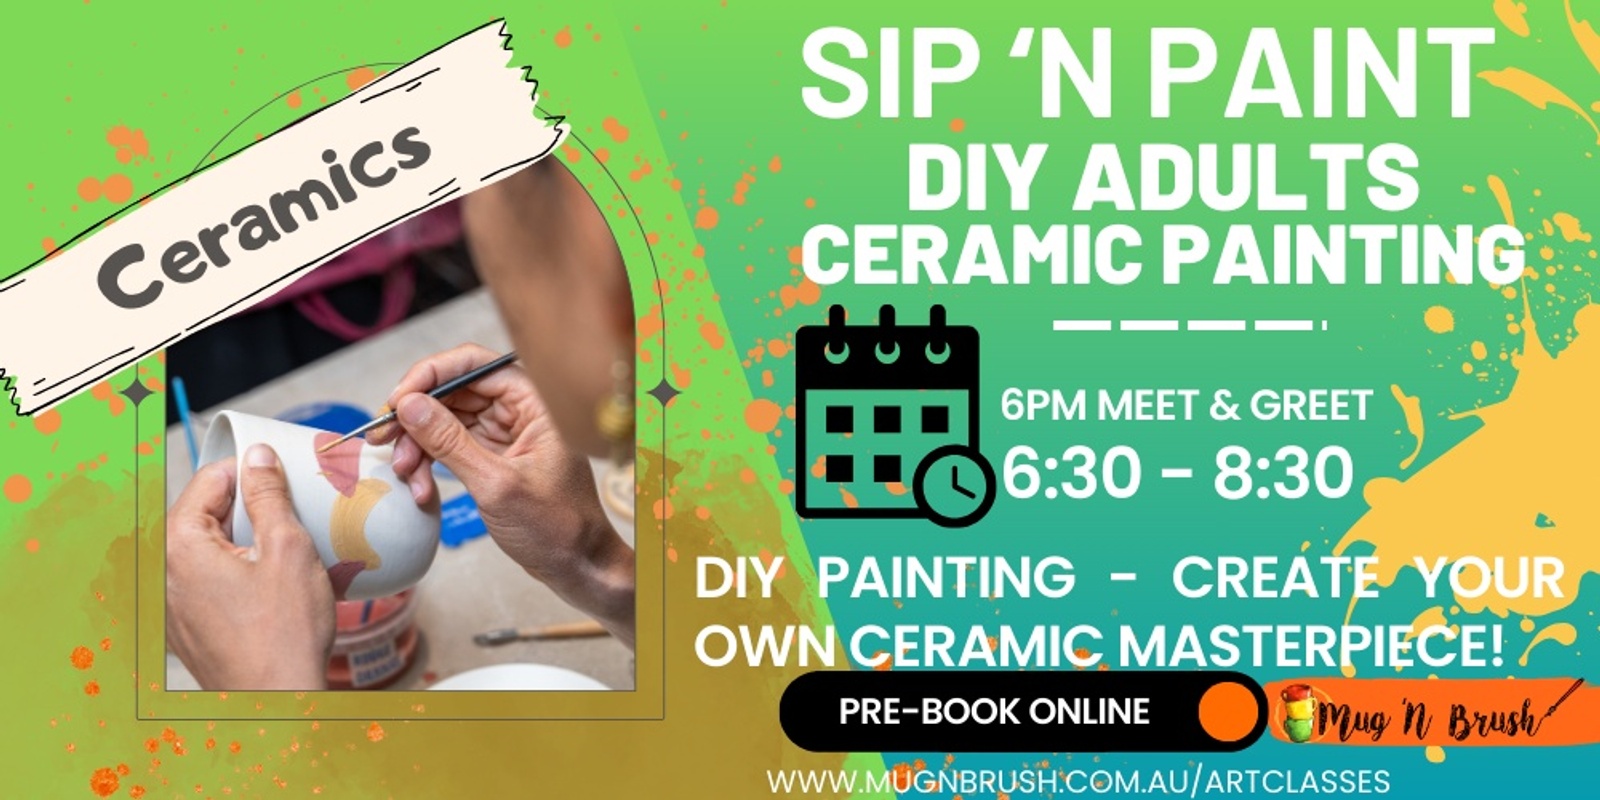 Banner image for Sip 'n Paint Evening 18+  Ceramic Painting